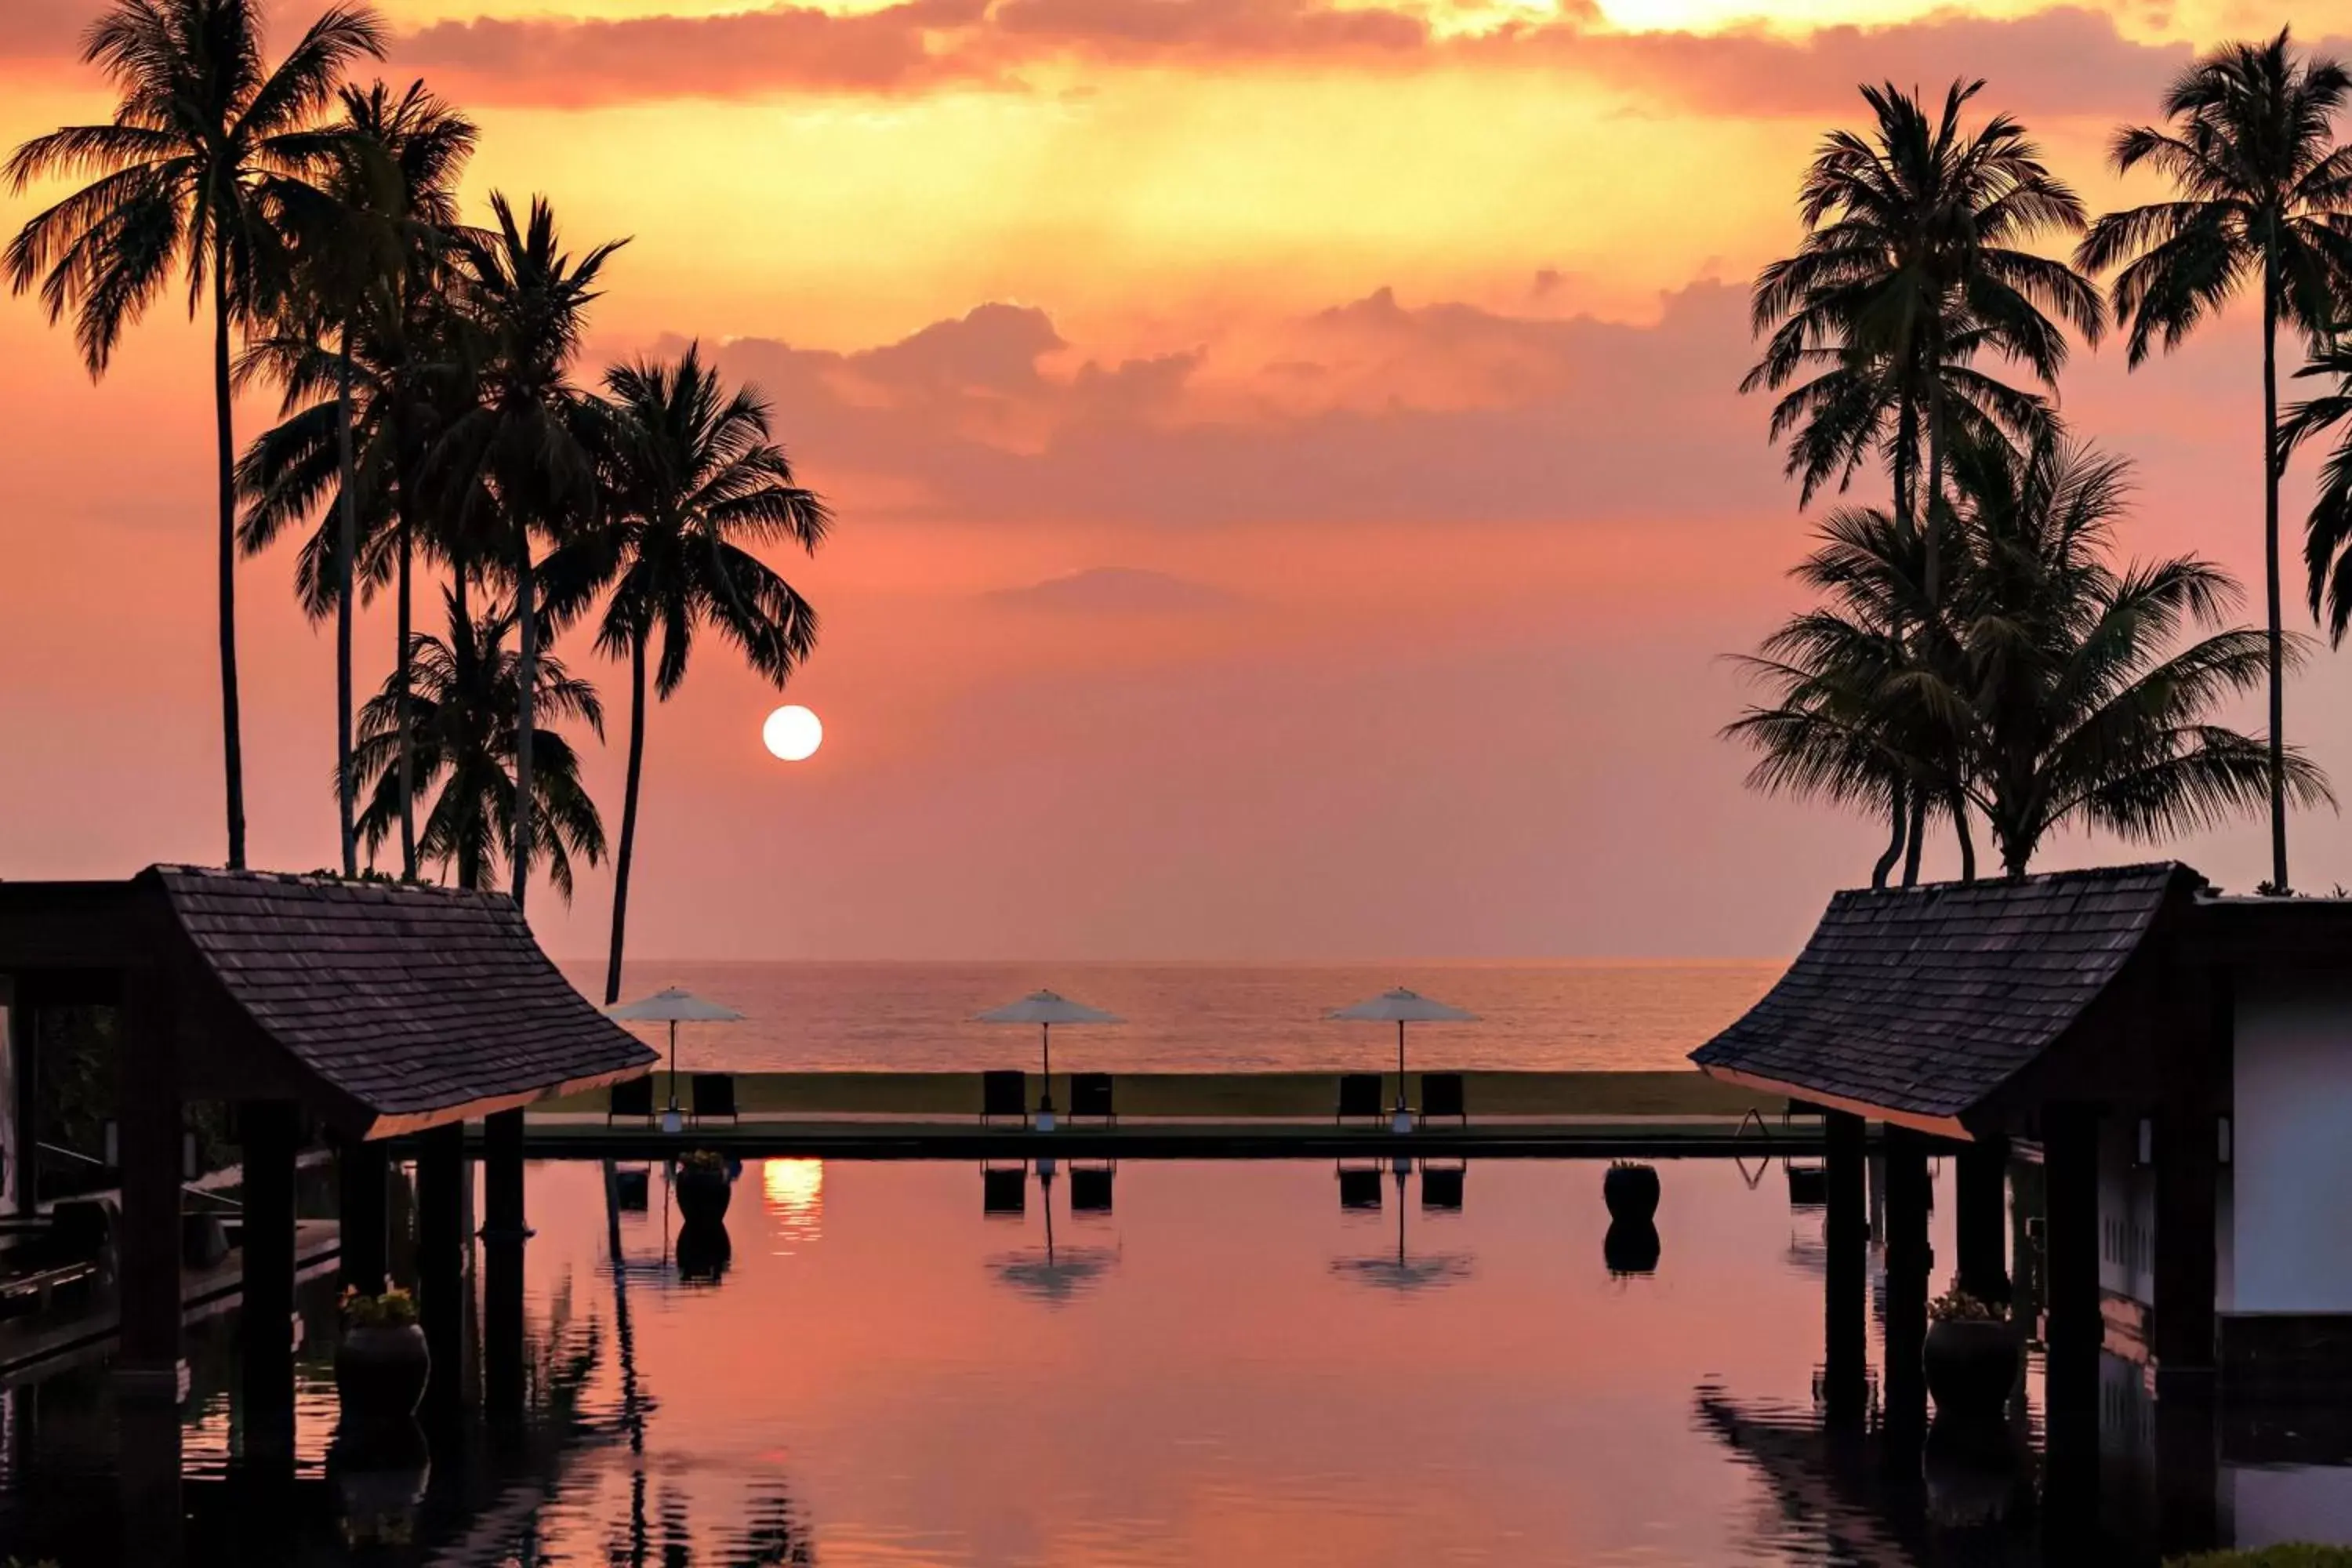 Other, Sunrise/Sunset in JW Marriott Khao Lak Resort and Spa